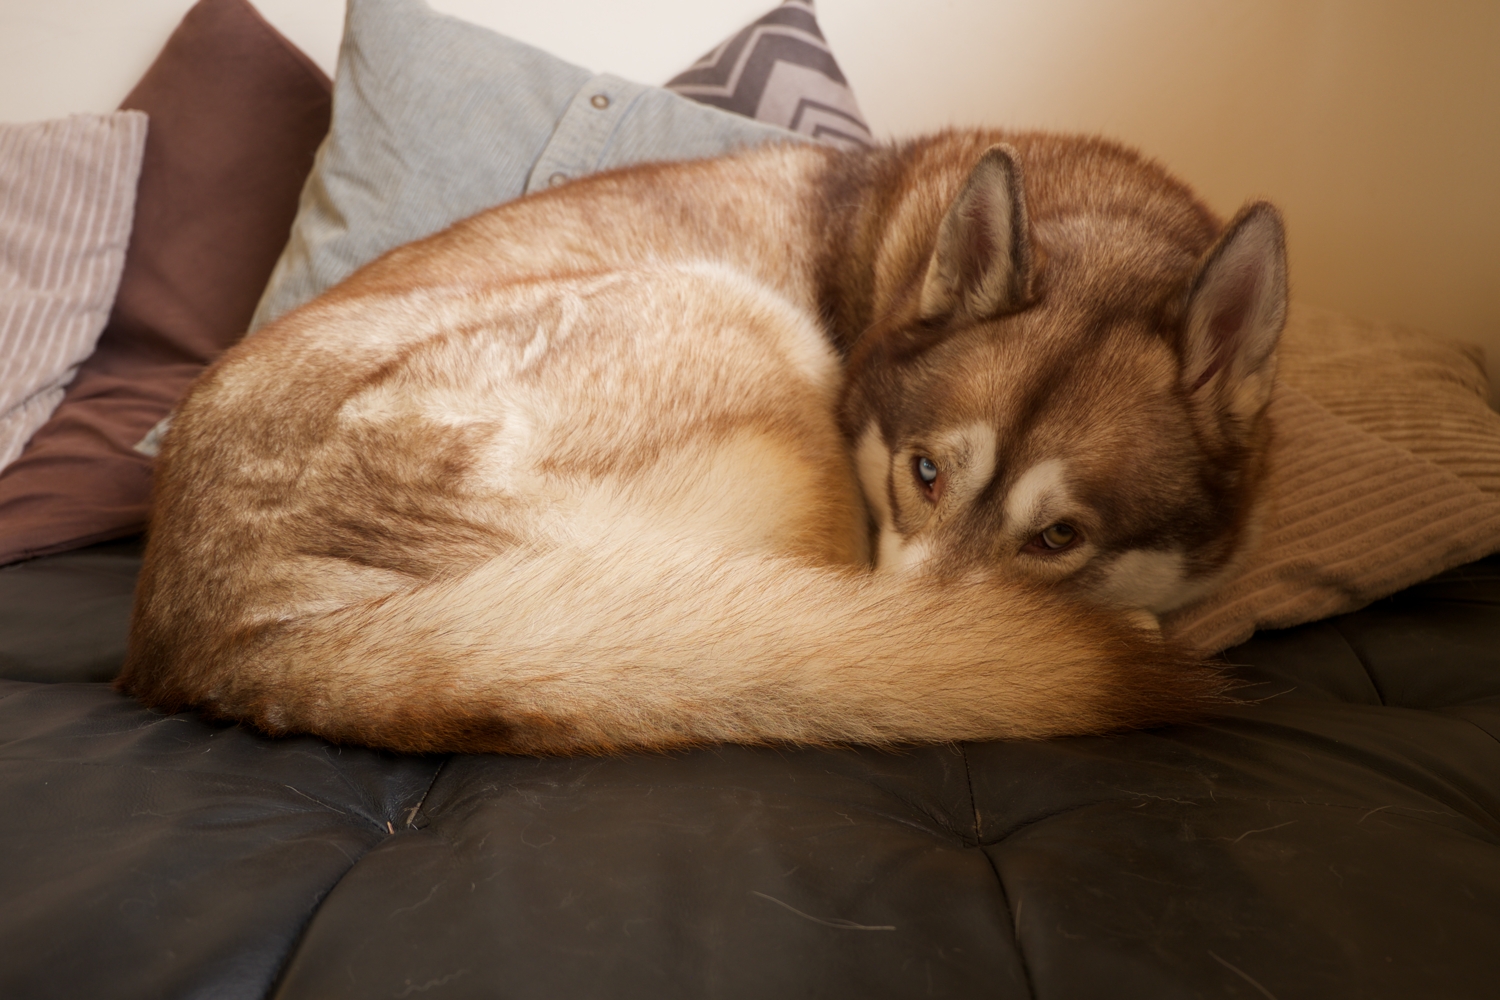 Photo of Oskar the dog curled up on the sofa, with a blurry background